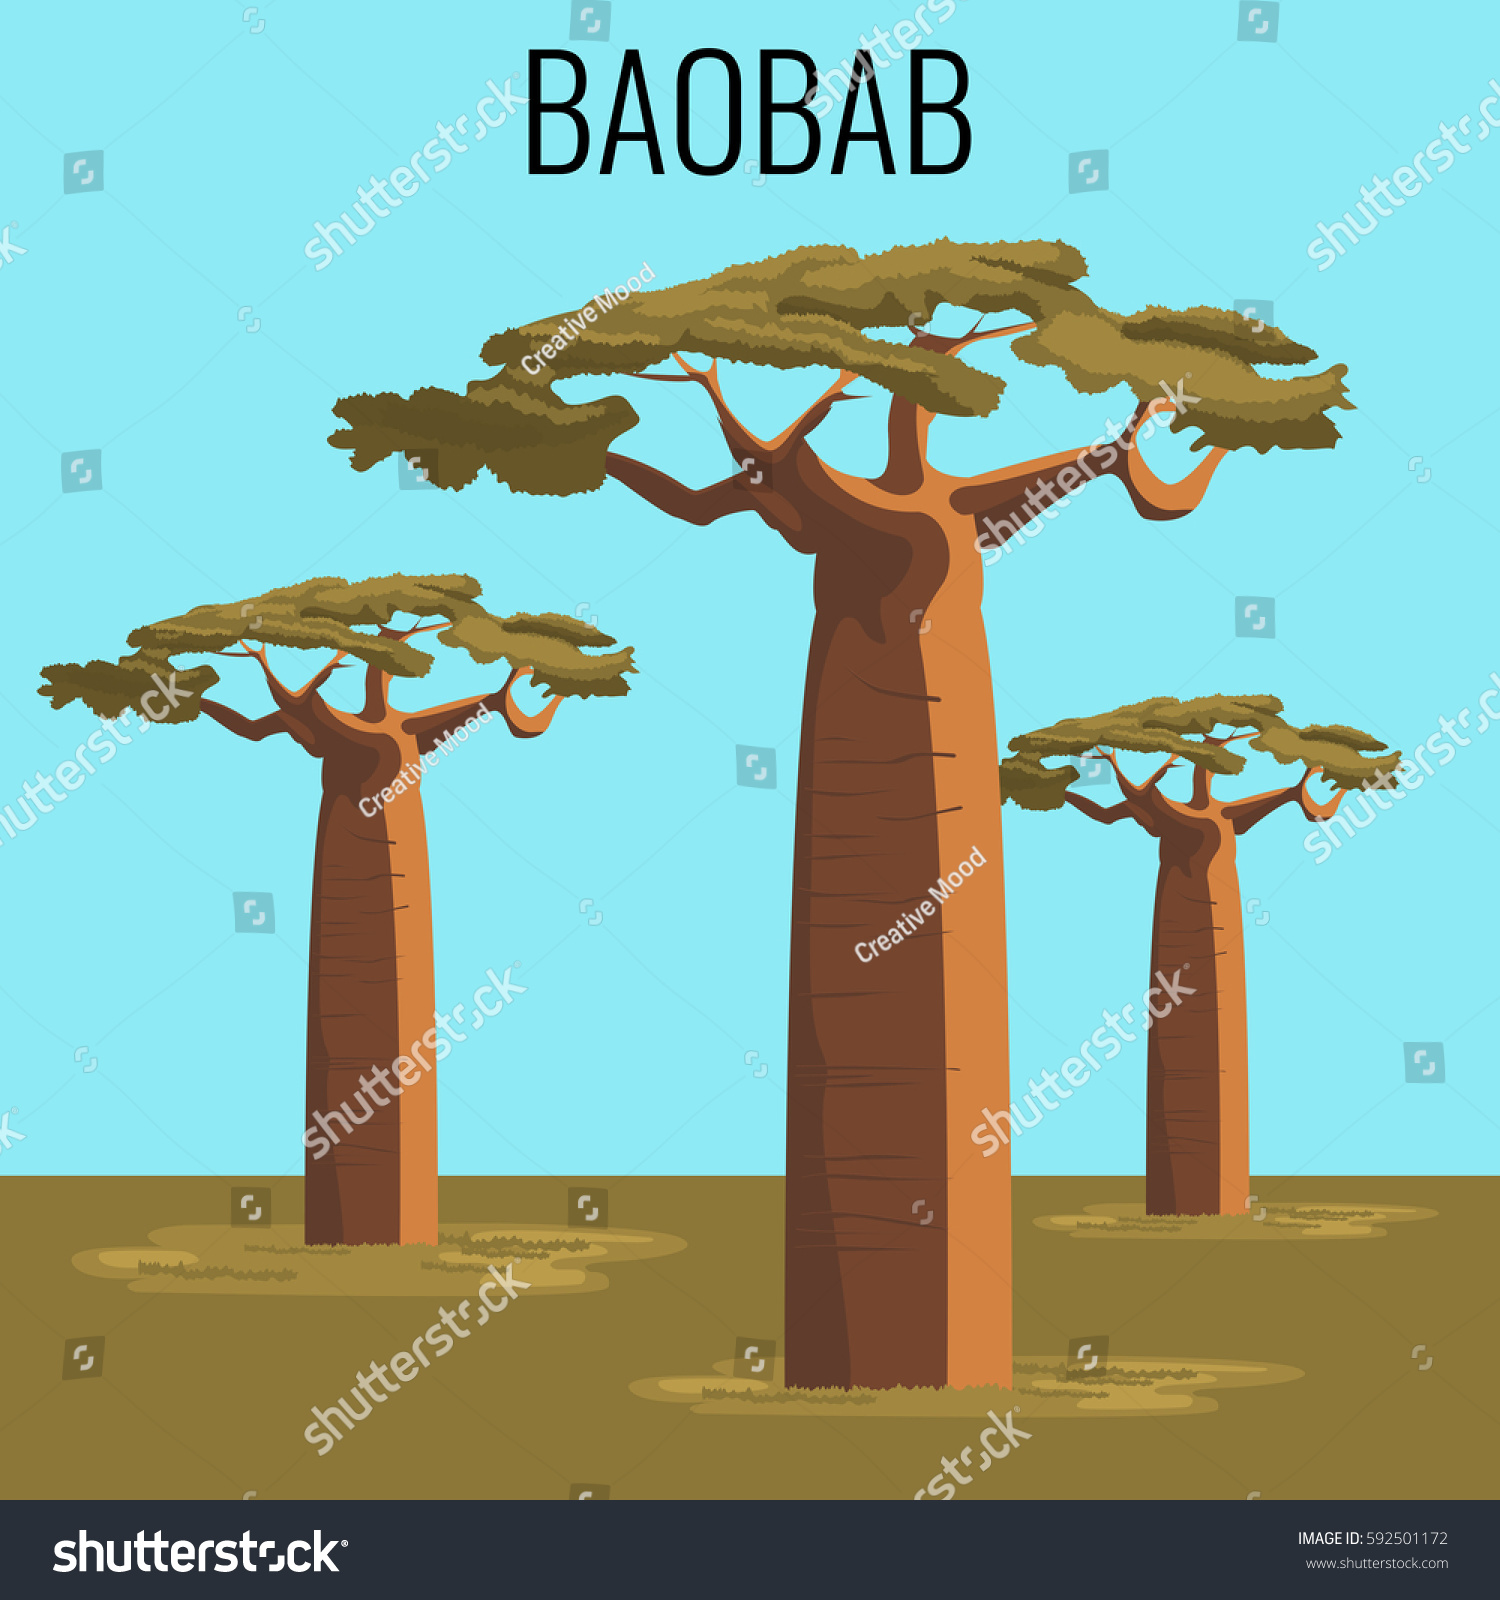 SVG of African baobab tree illustration. Vector illustration of powerful plant in realistic style svg